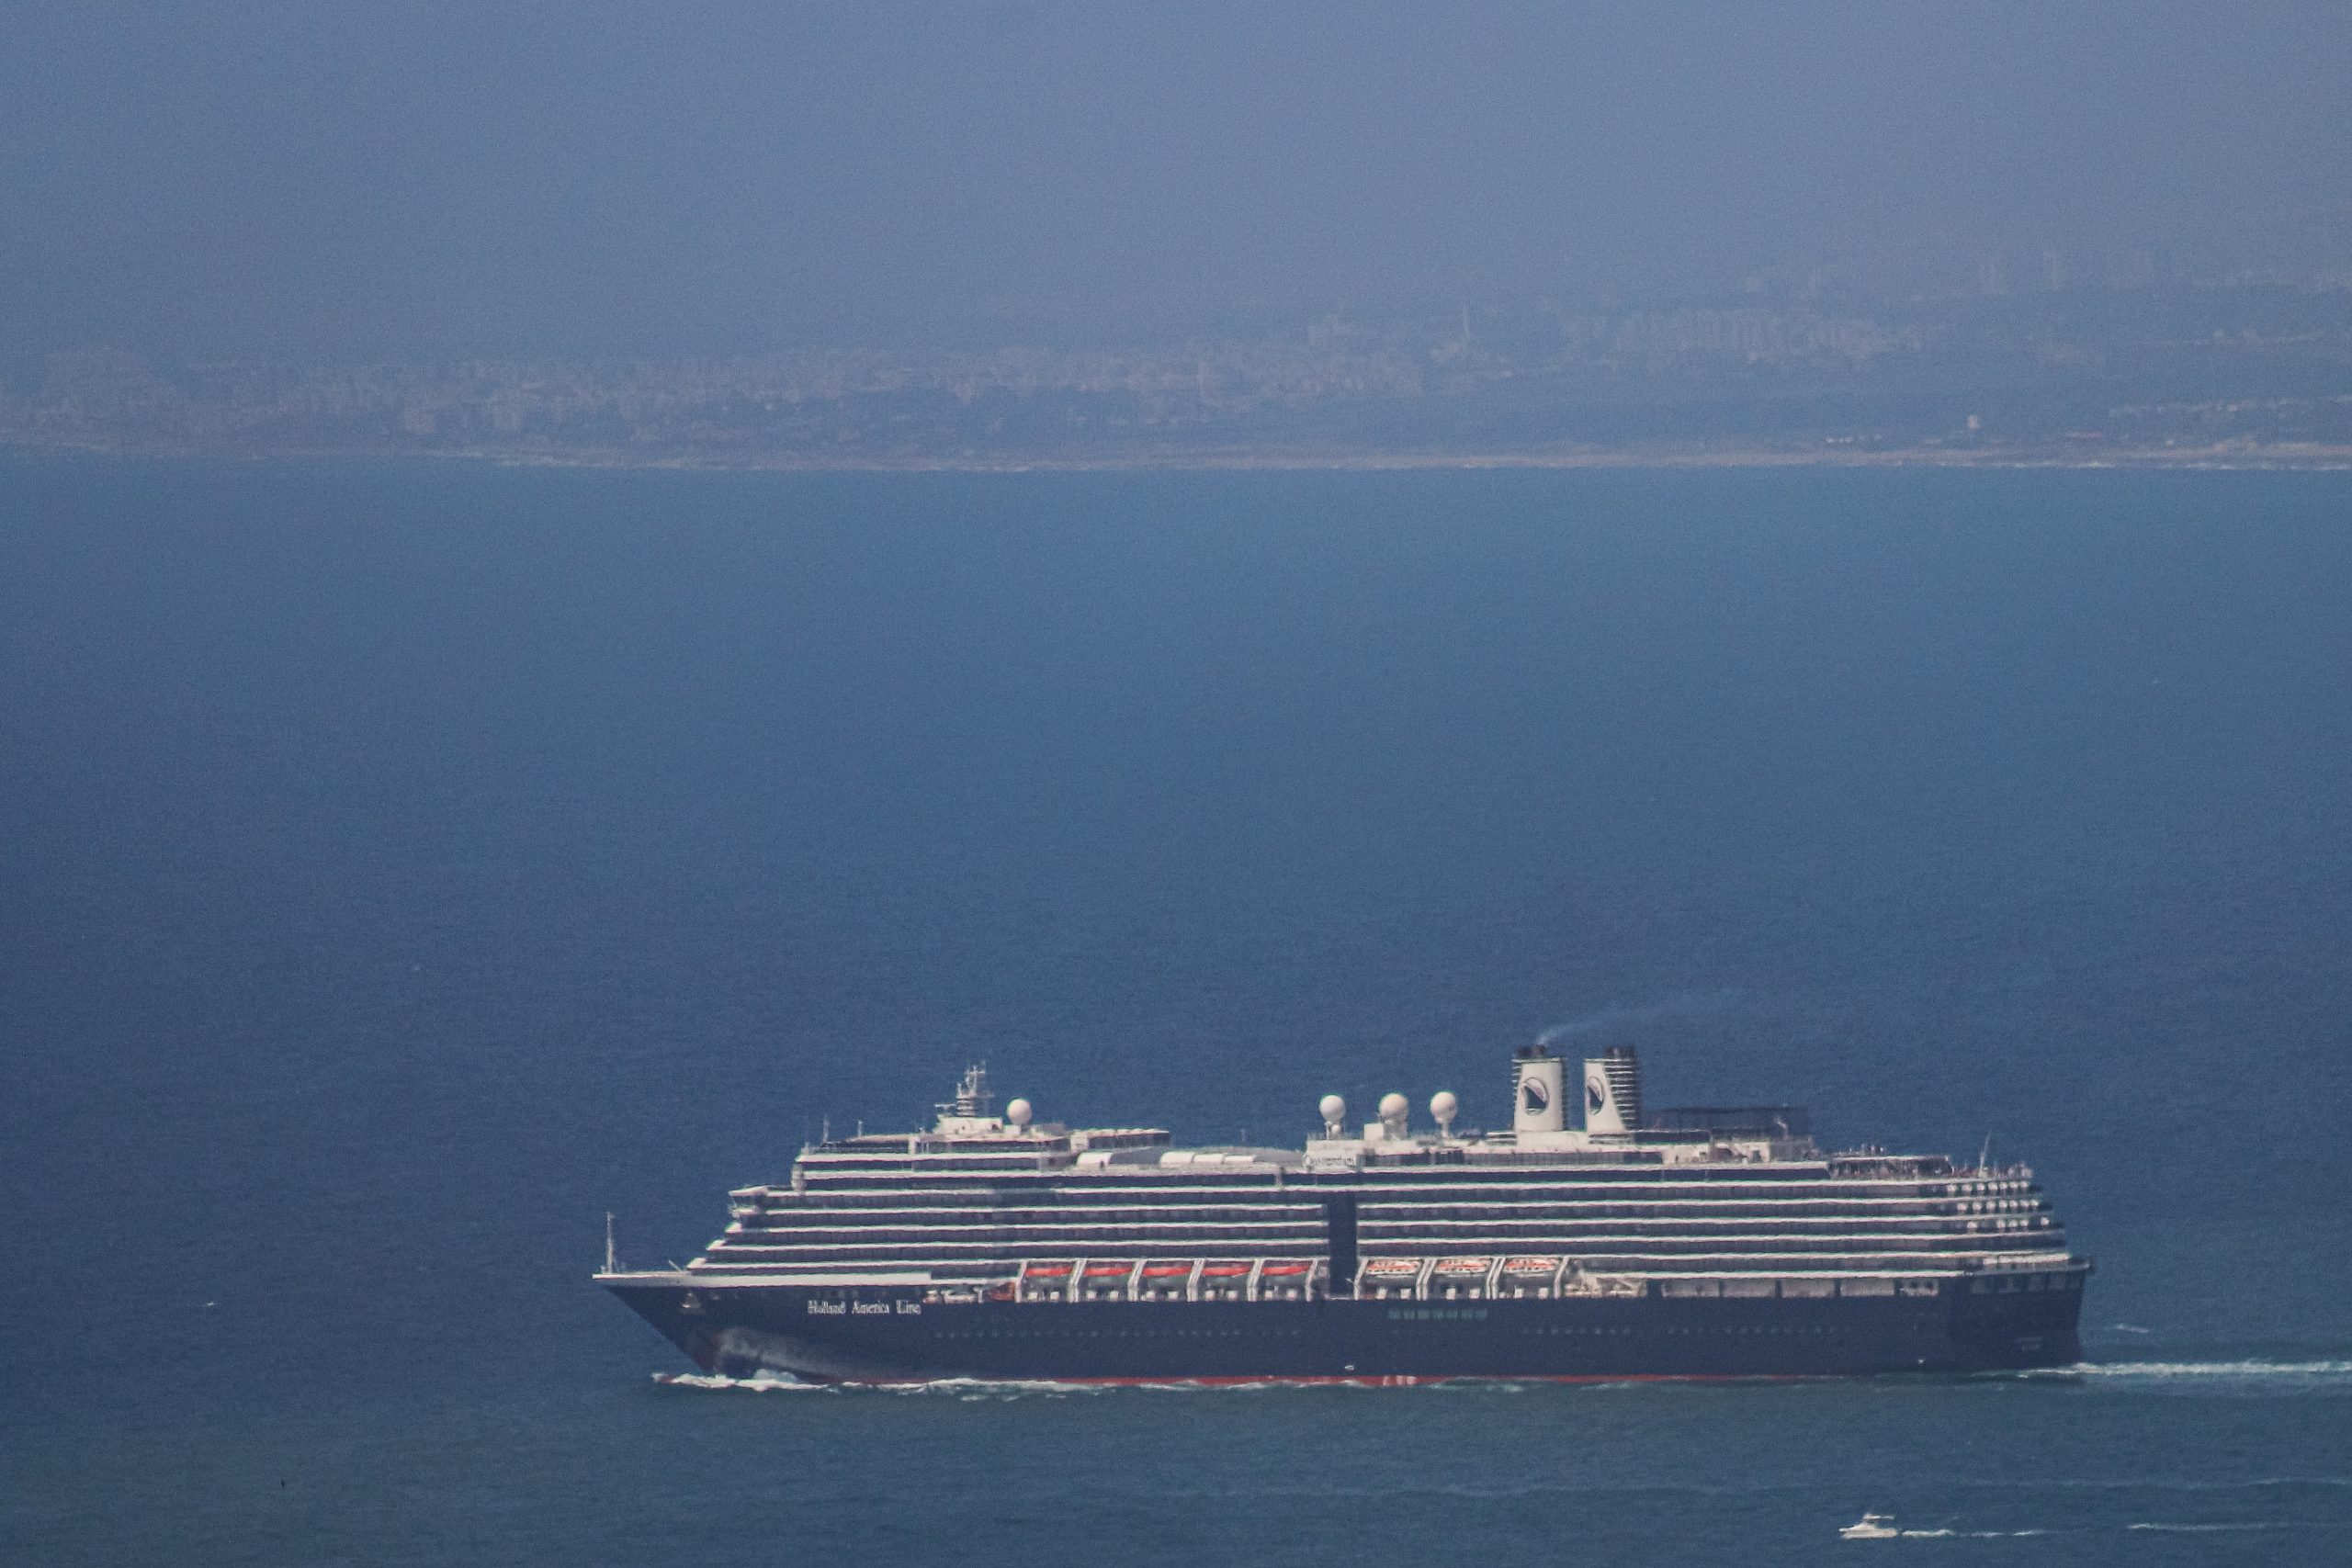 Holland America Line is back on Holy Land cruise